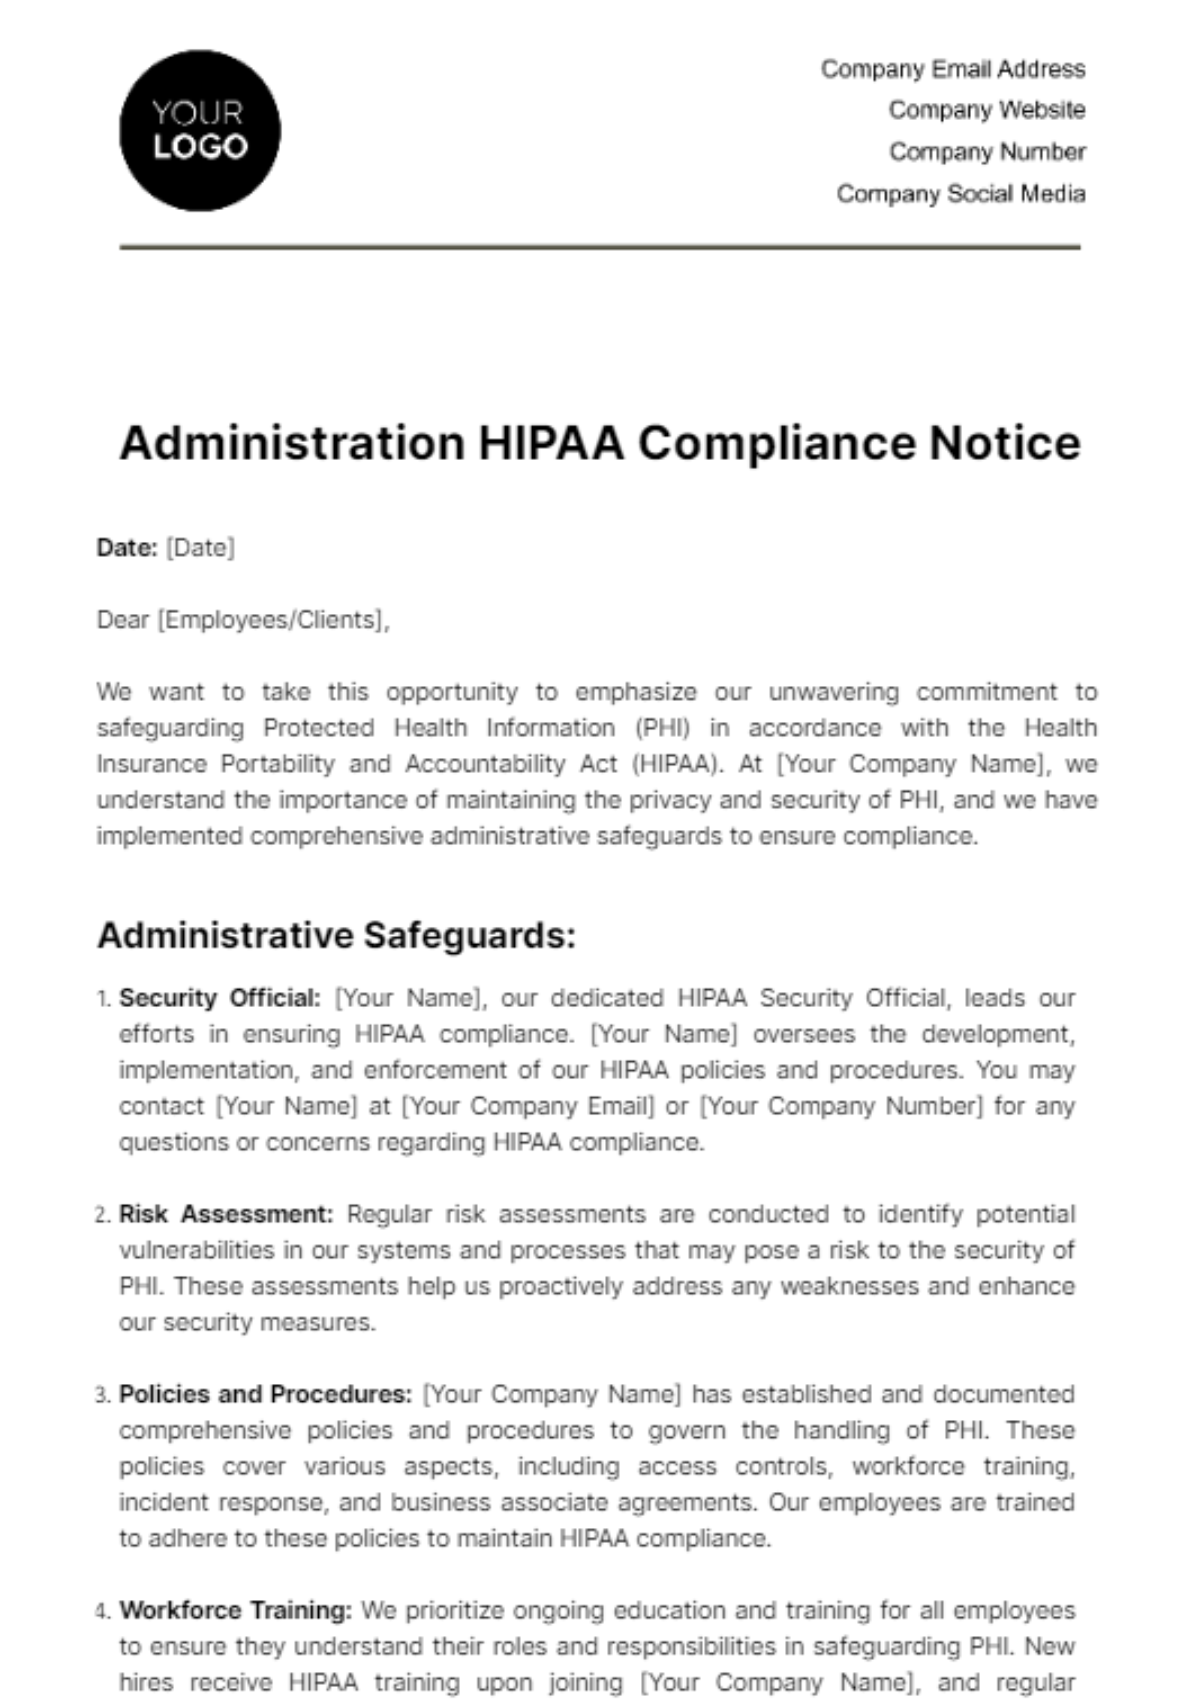 Administration HIPAA Compliance Notice Template